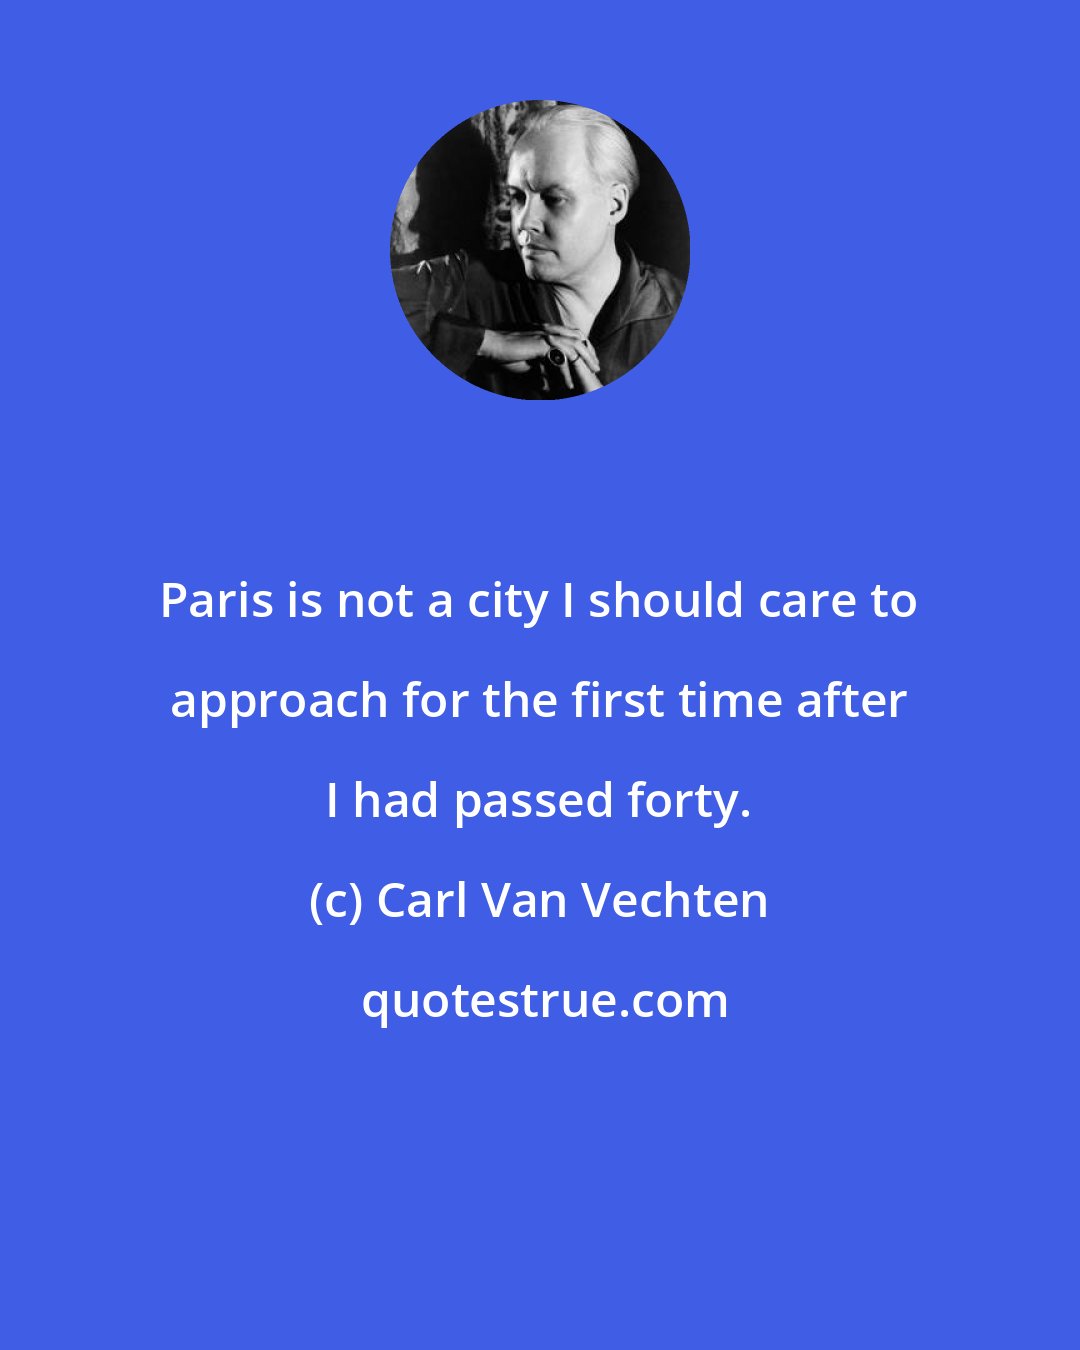 Carl Van Vechten: Paris is not a city I should care to approach for the first time after I had passed forty.